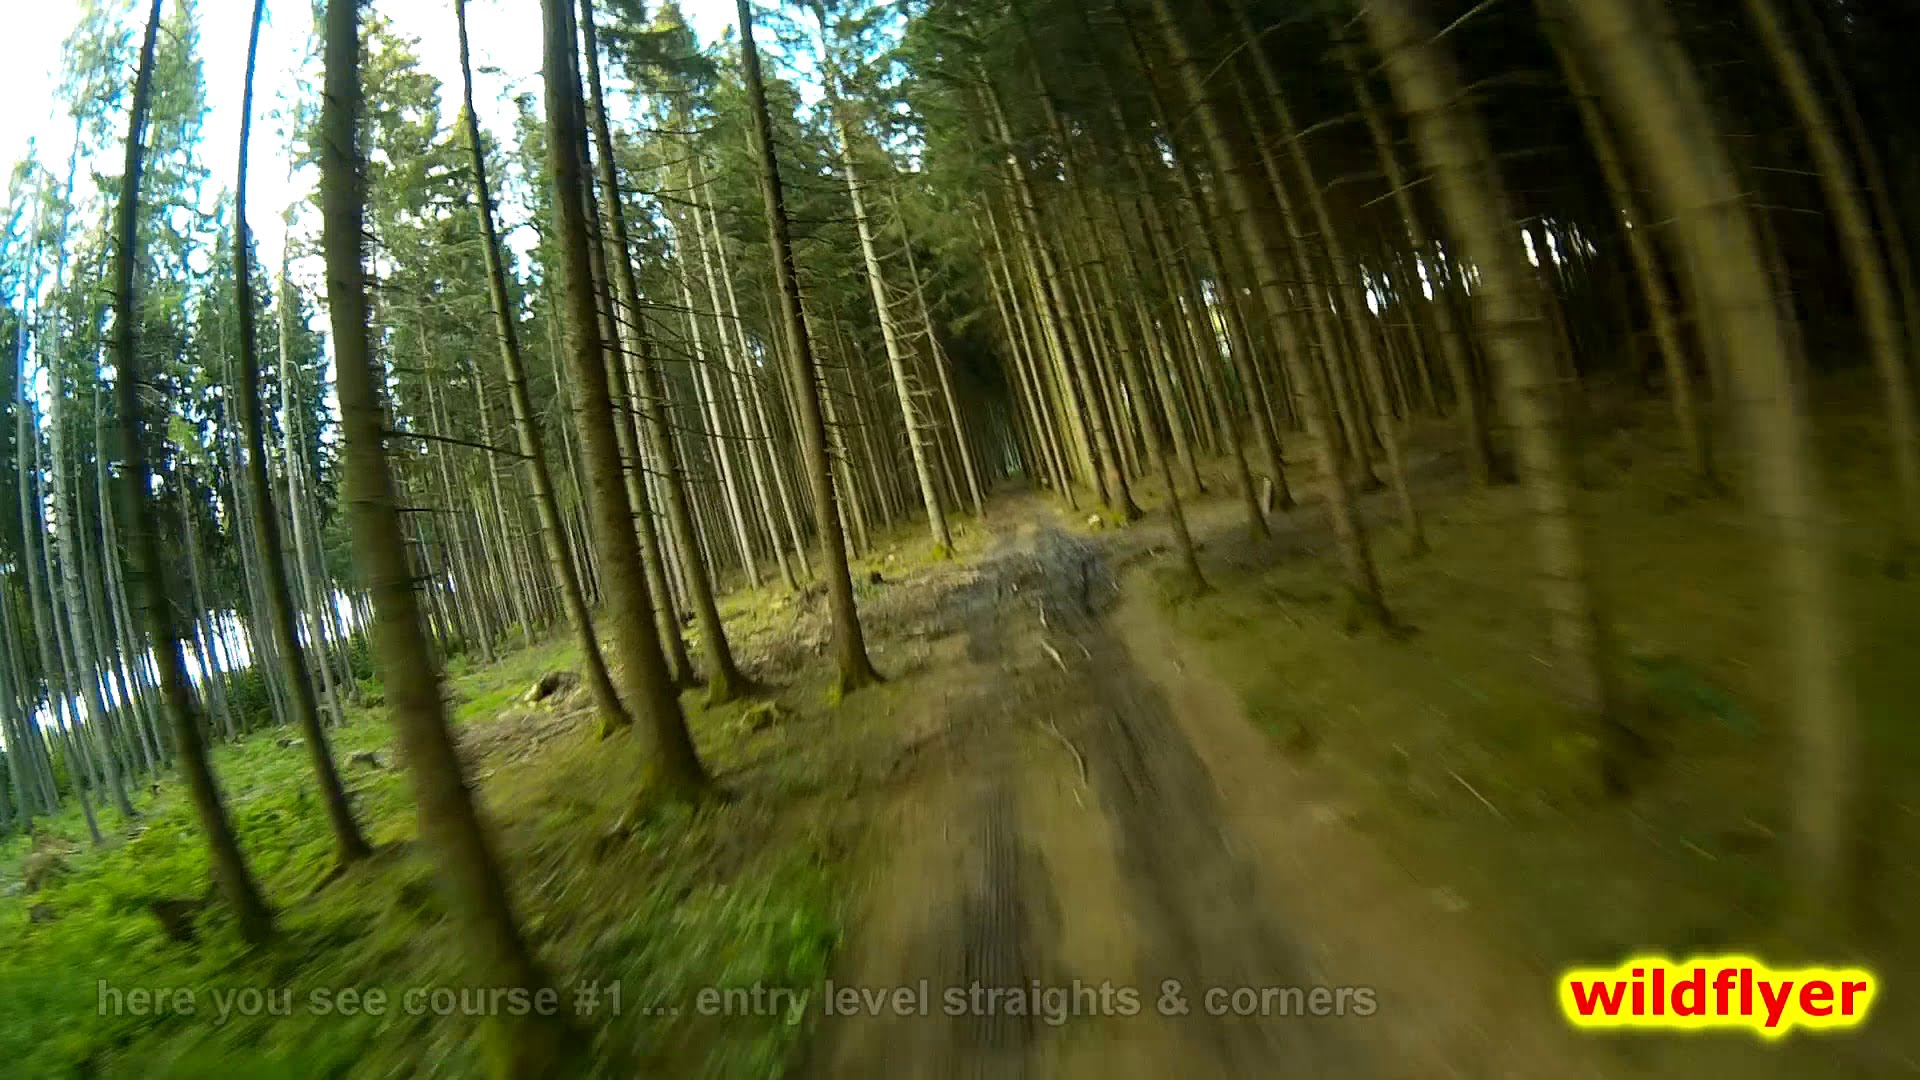 wildflyers “The Tree Arena” #1 basic practice for drone speed racing :-)